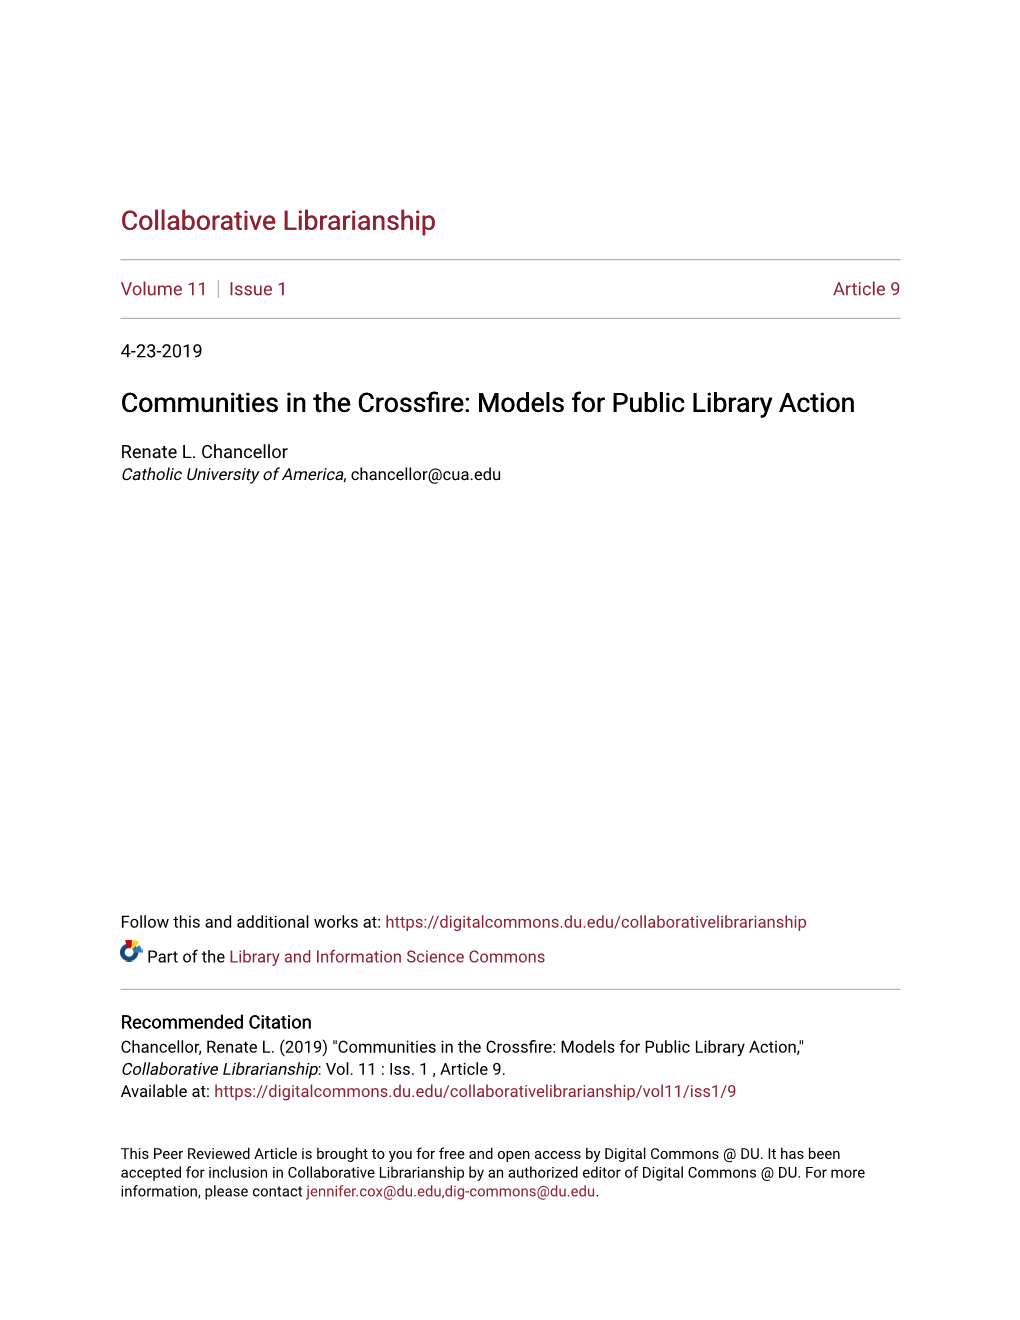 Communities in the Crossfire: Models for Public Library Action